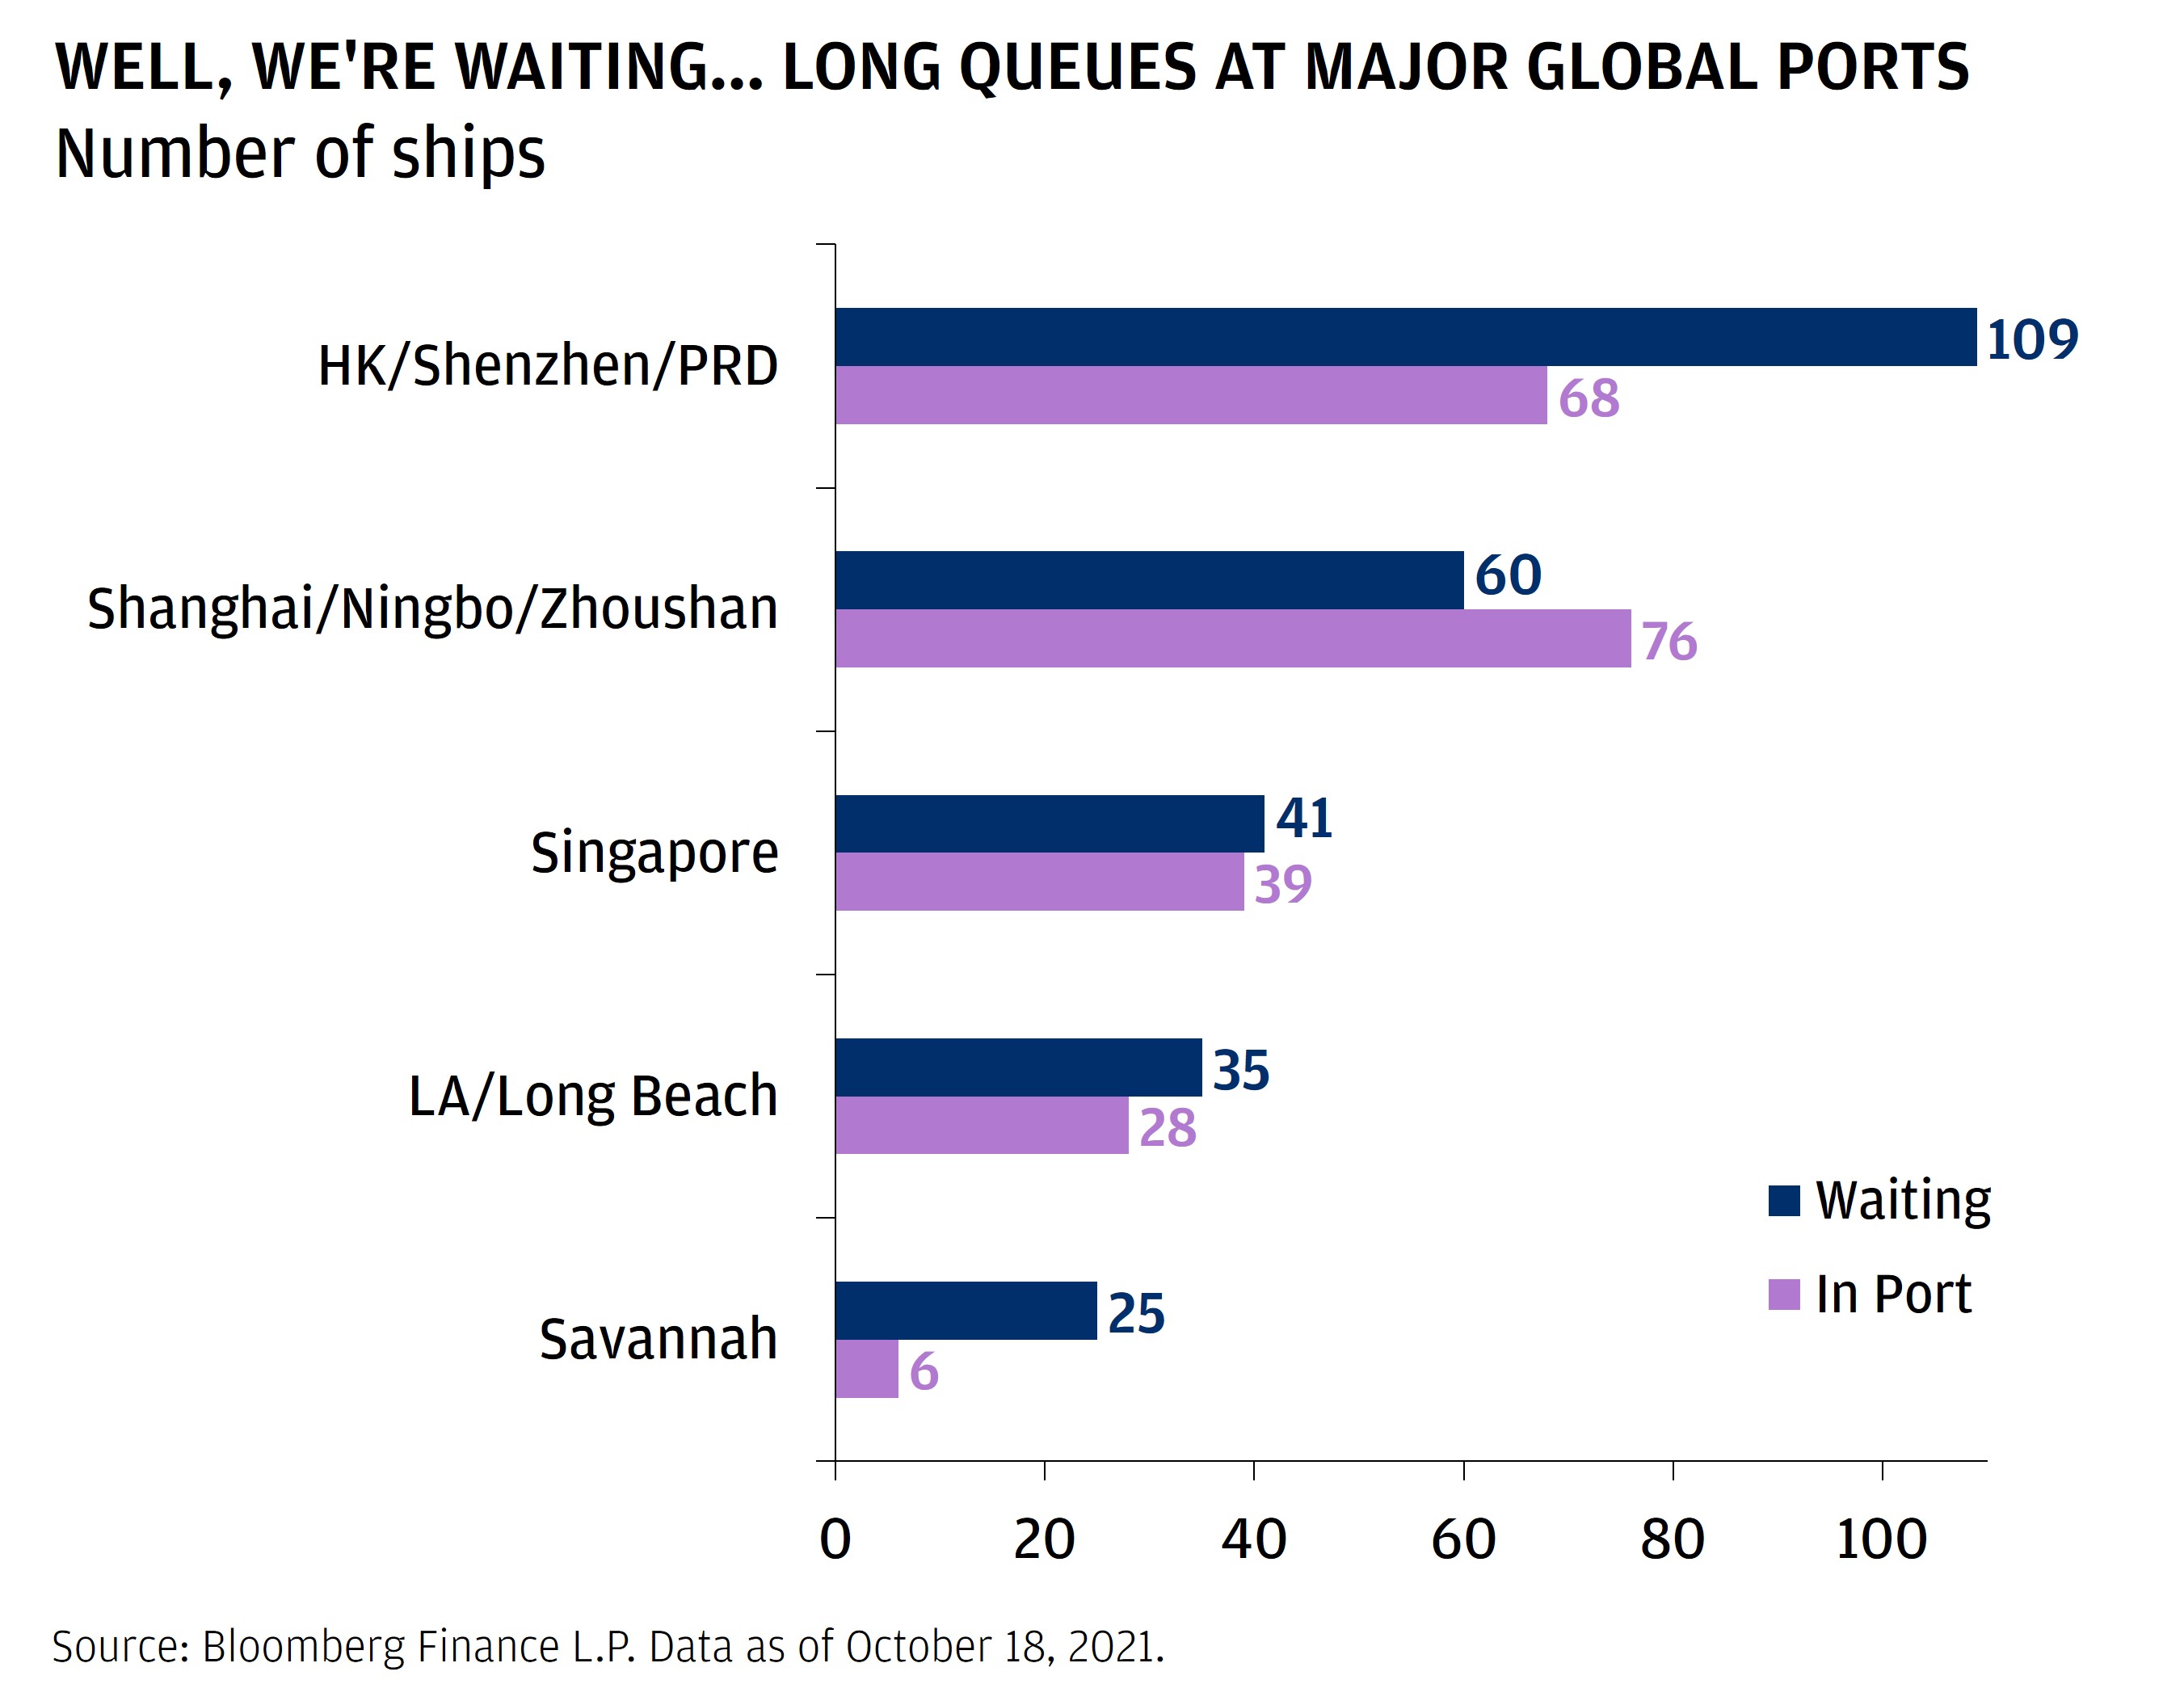 This chart shows the number of containerships waiting and in port in five major global ports as of October 18, 2021. In Hong Kong/Shenzhen/PRD, there are 109 ships waiting and 68 in port. In Shanghai/Ningbo/Zhoushan, there are 60 ships waiting and 76 in port. In Singapore, there are 41 ships waiting and 39 in port. In LA/Long Beach, there are 35 waiting and 28 in port. Finally, in Savannah, there are 25 waiting and 6 in port.